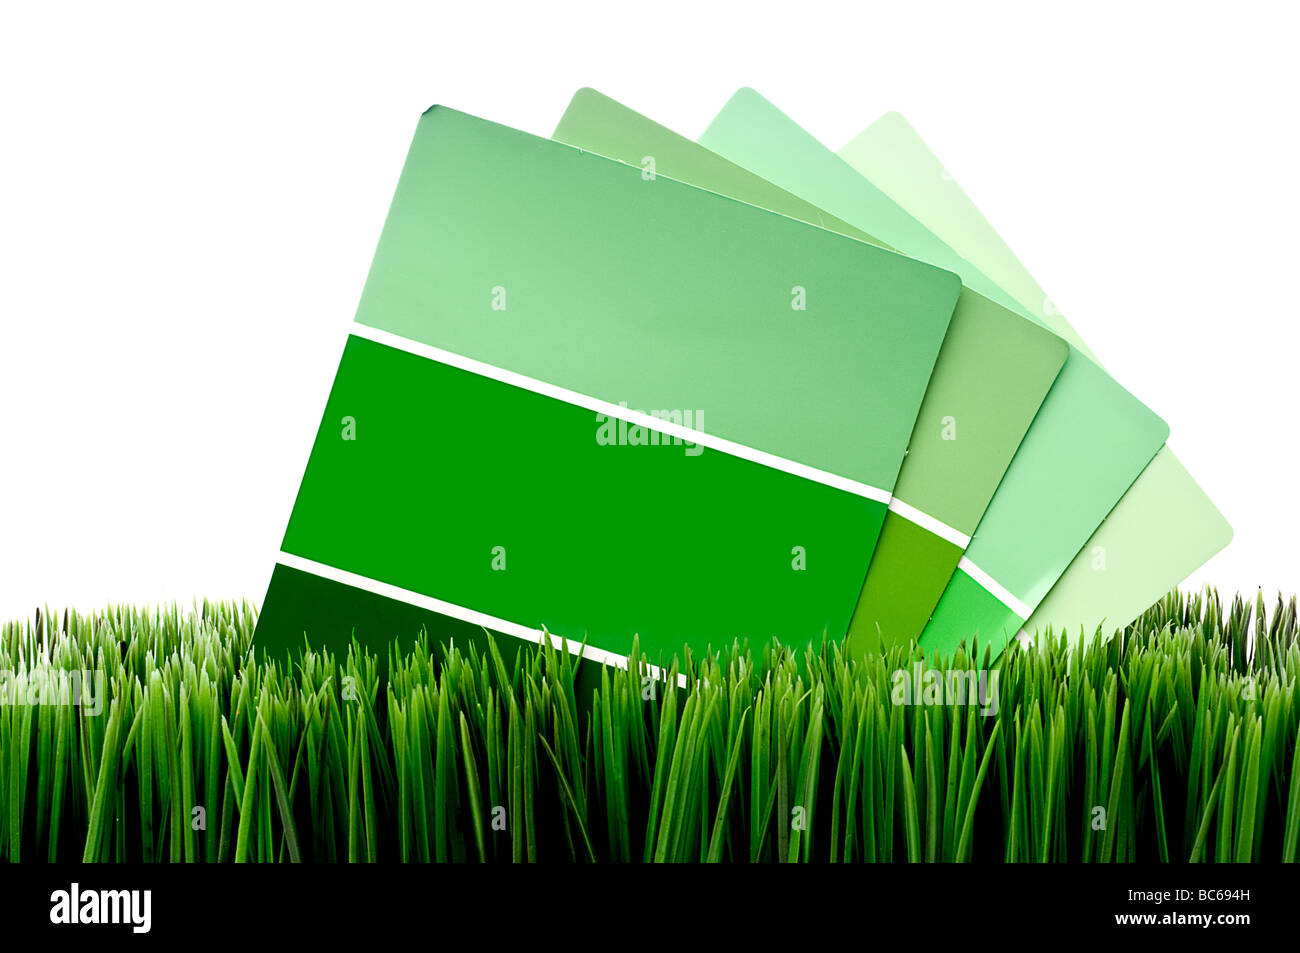 Horizontal image of green paint chip samples on green grass with a white background Stock Photo